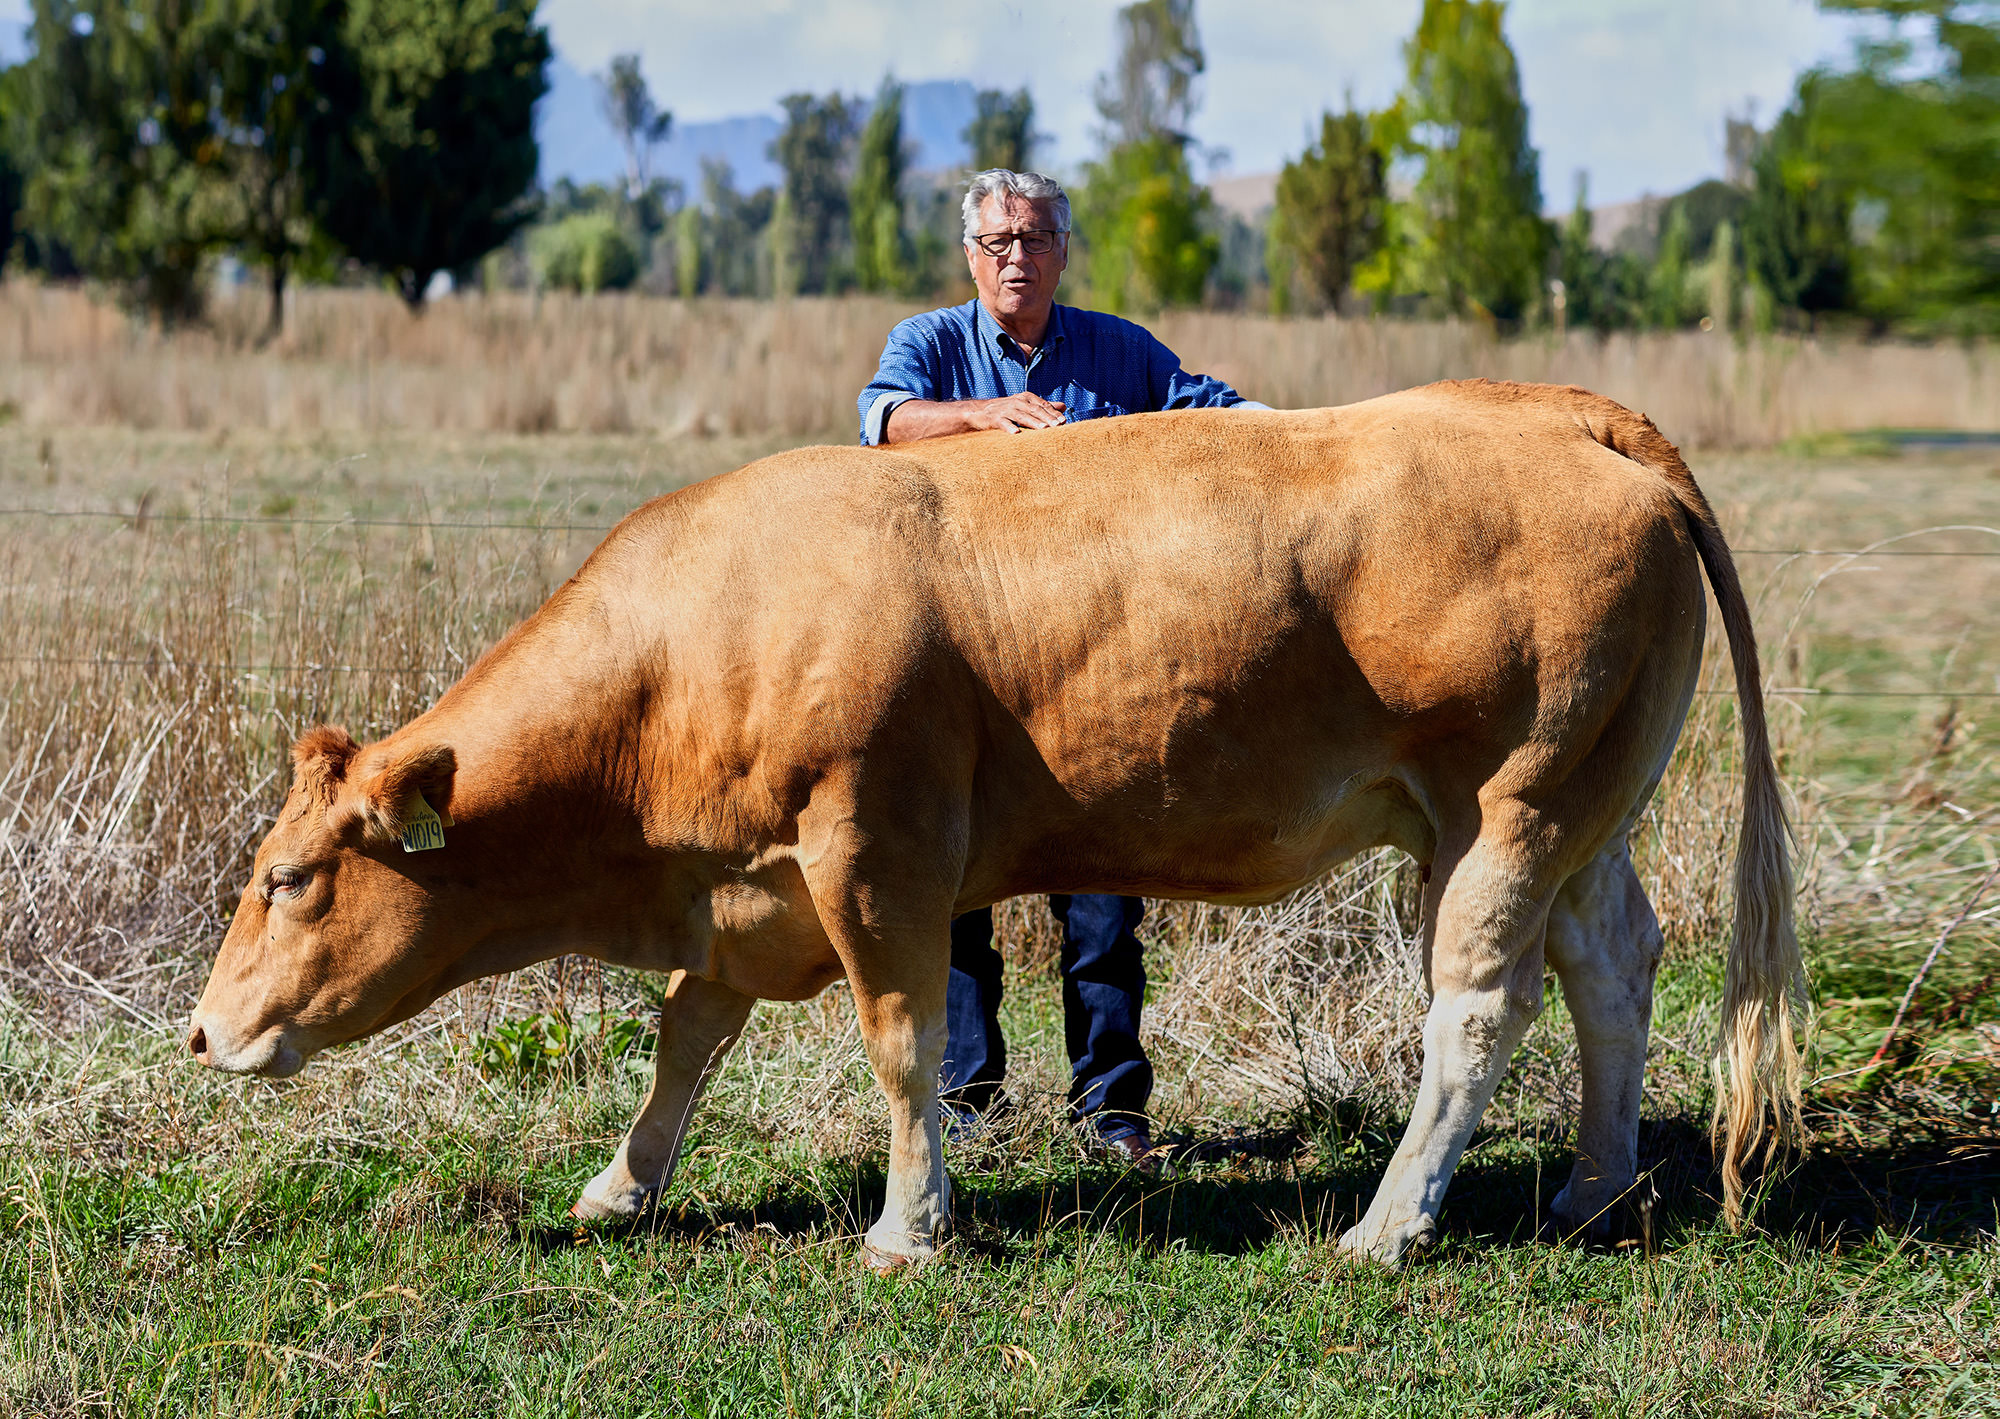 David Blackmore with one of his Rubia Gallega cows.